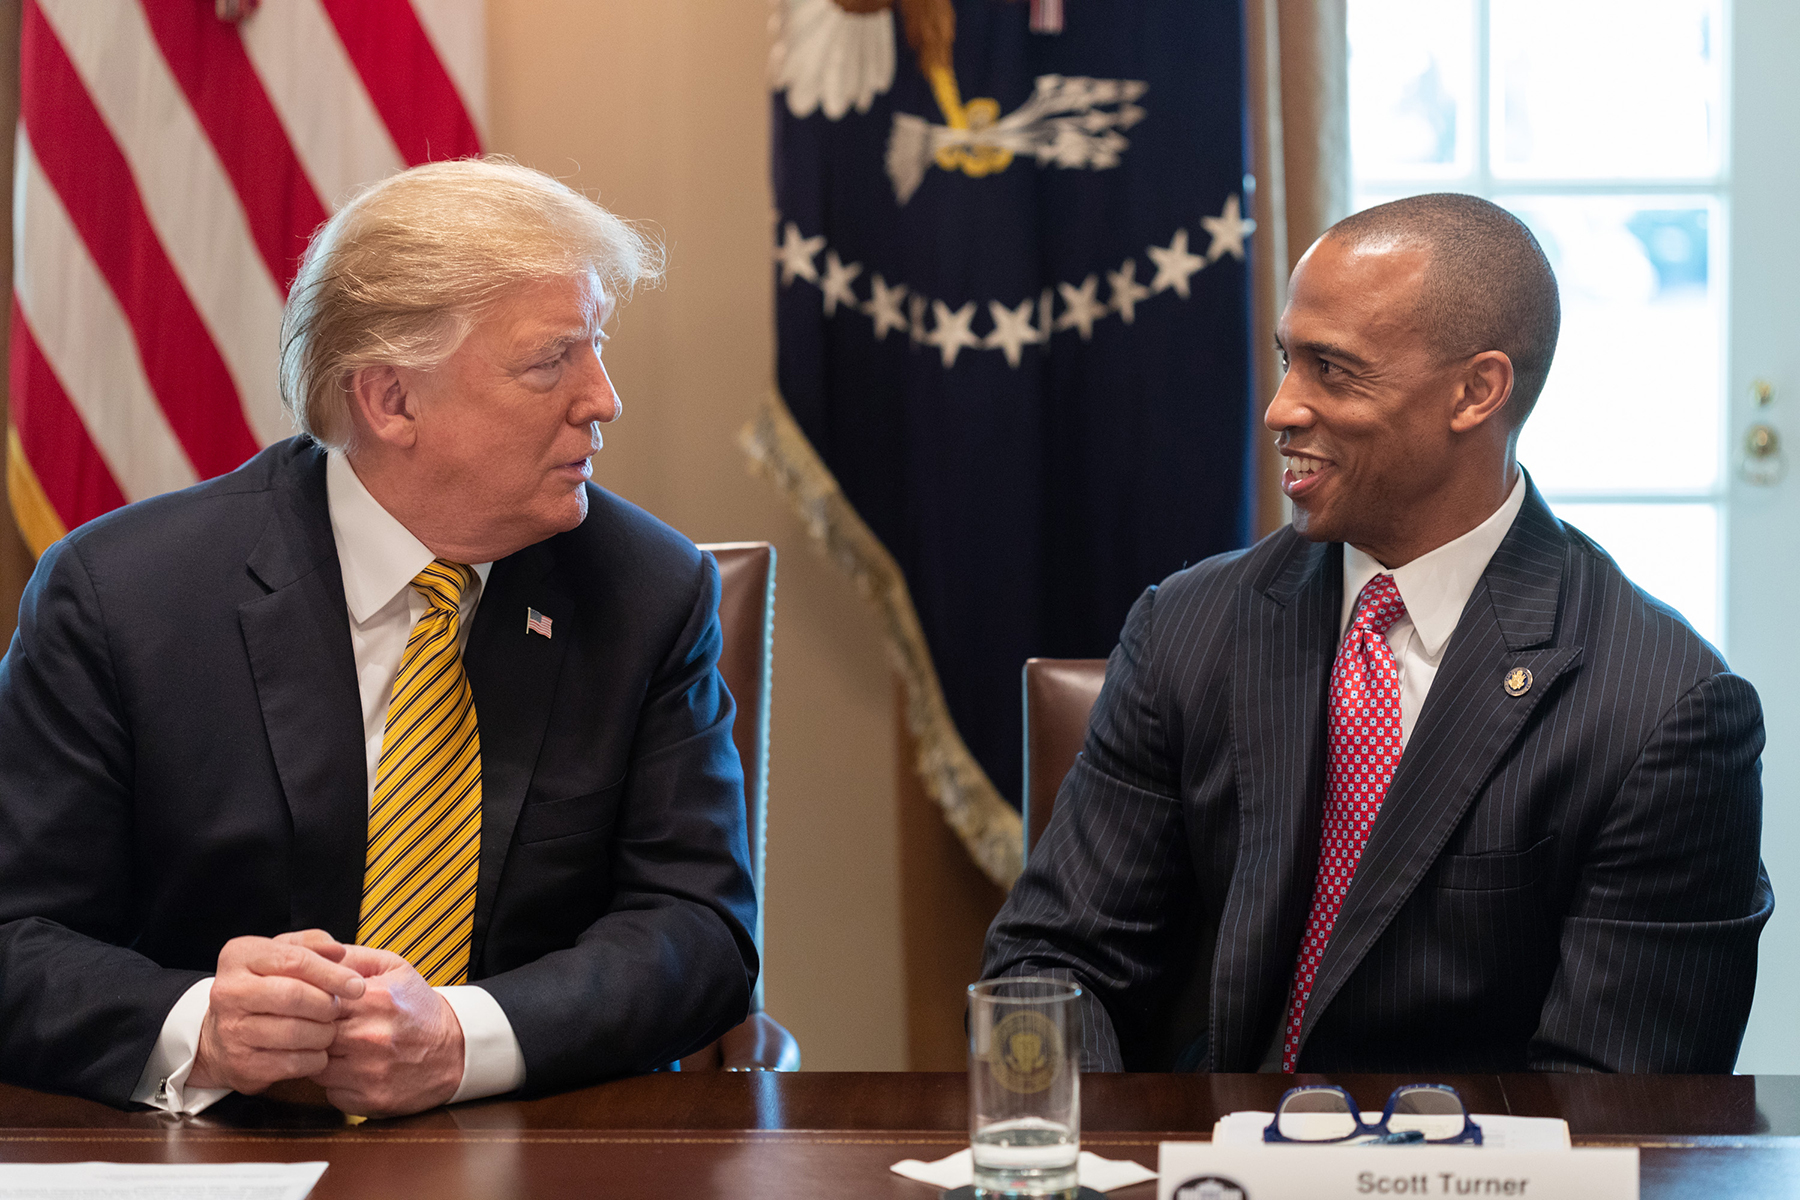 President Trump introduces Scott Turner as the Executive Director of the White House Opportunity and Revitalization Council